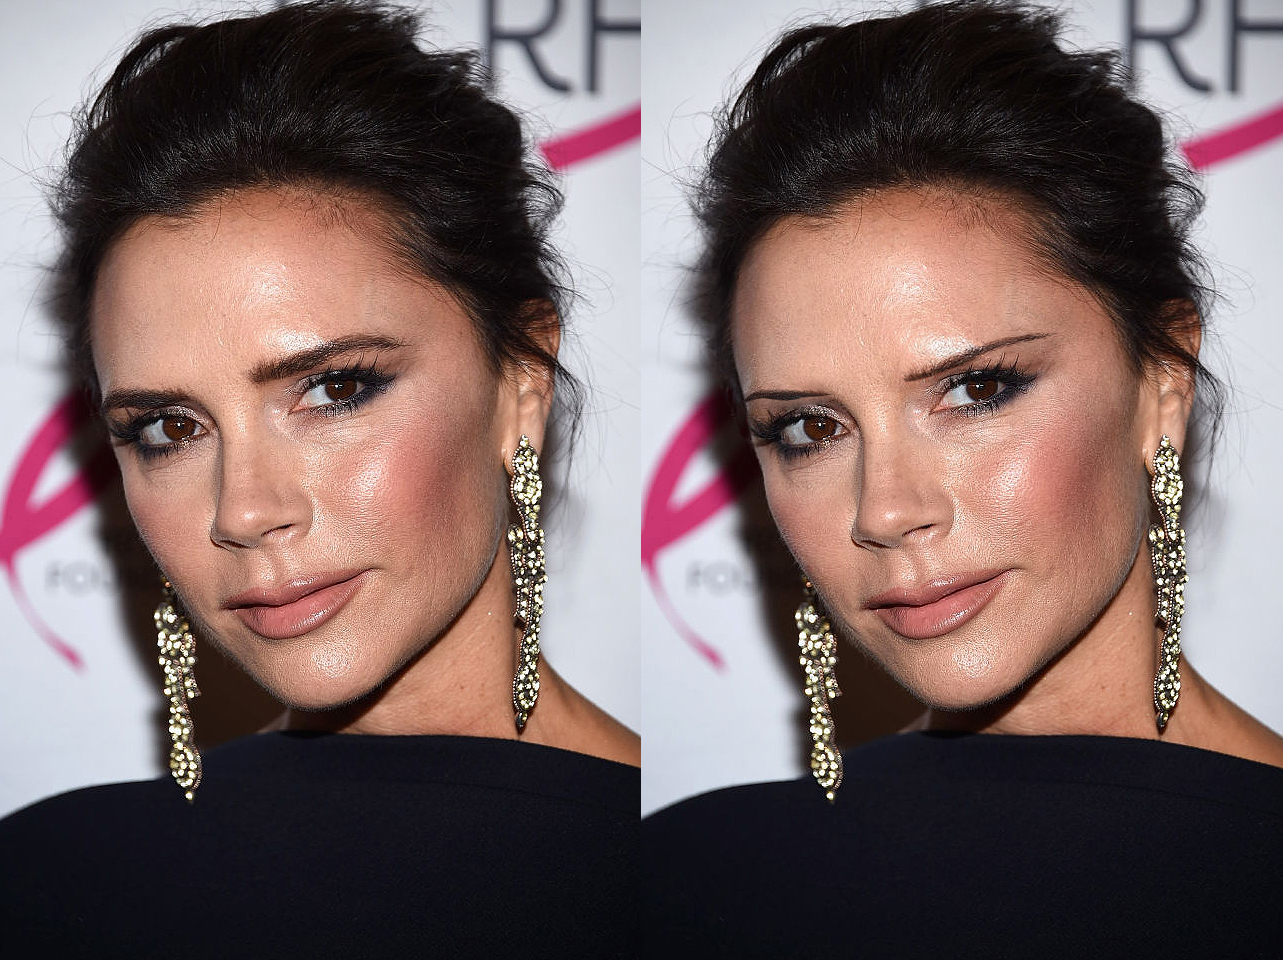 Victoria Beckham's signature brows from 2017 vs digitally edited thin-brow look | Source: Getty Images